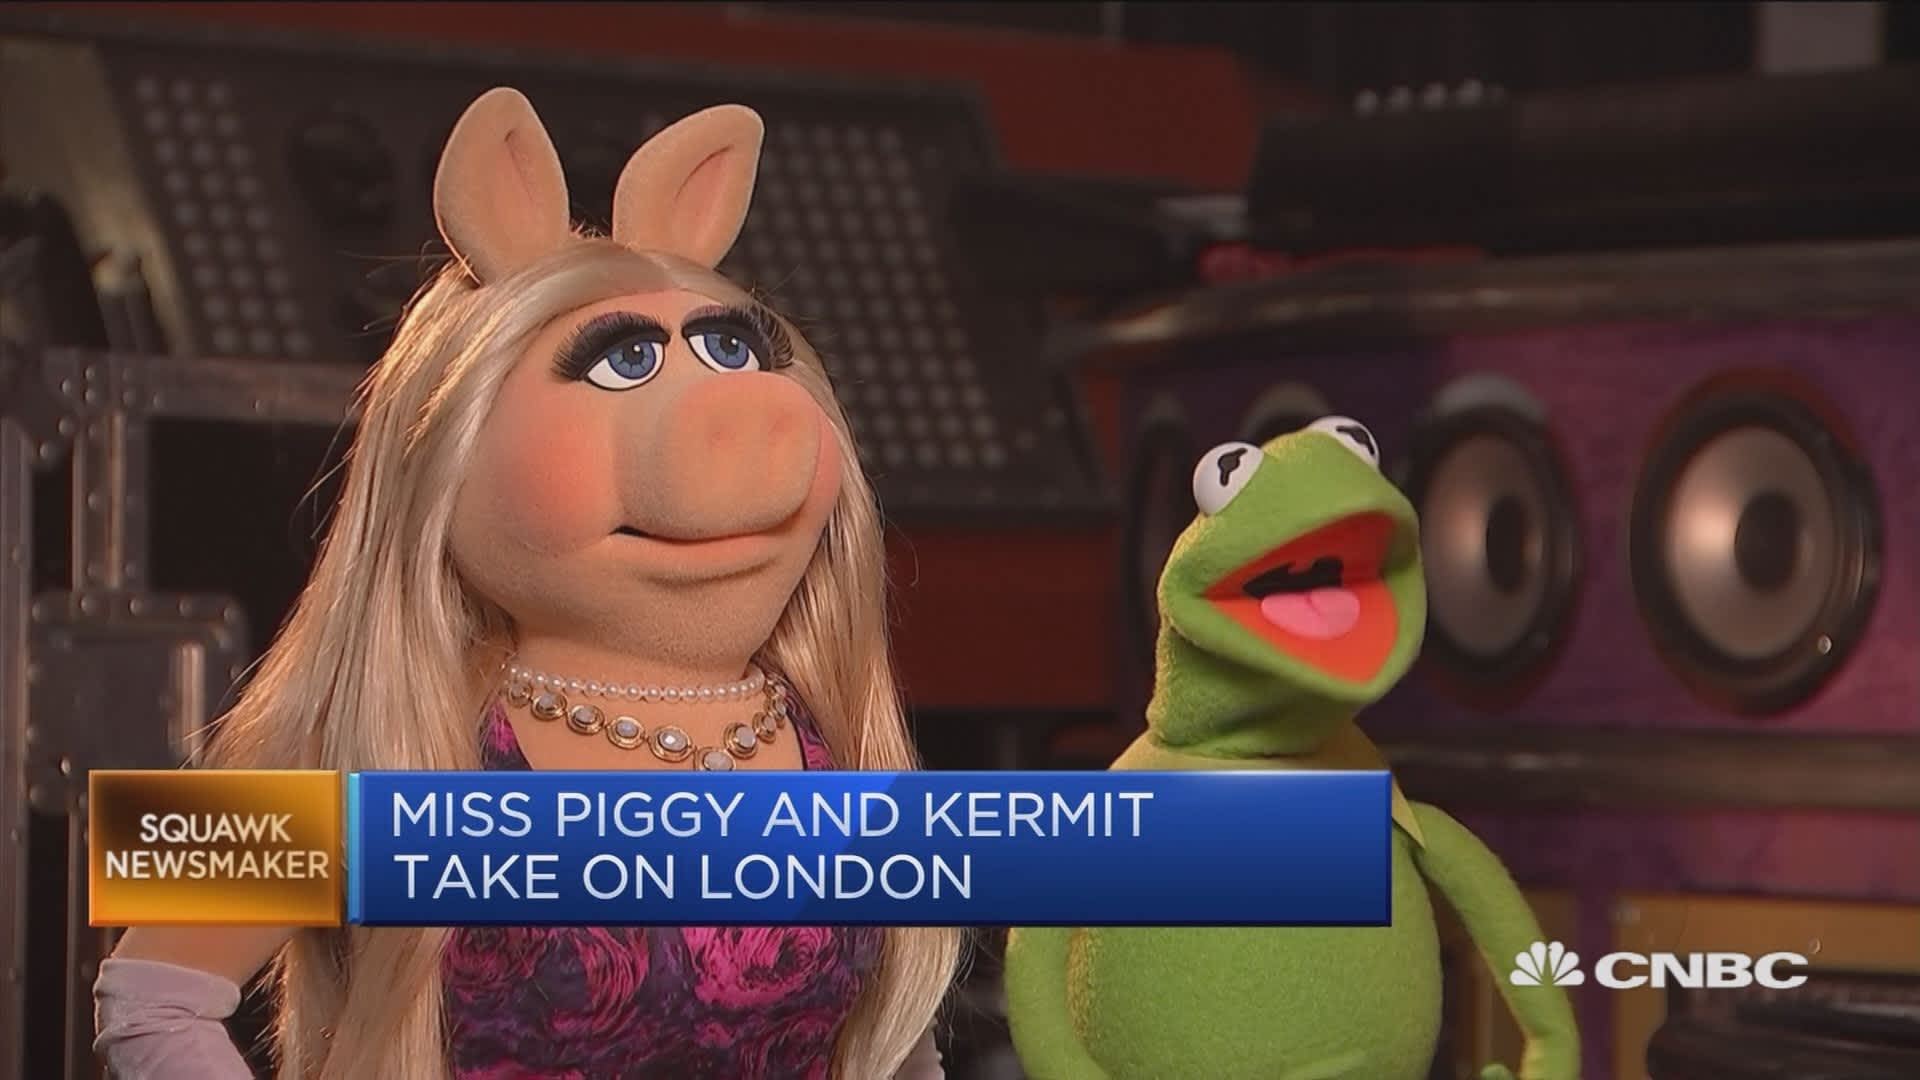 Miss Piggy and Kermit take on London